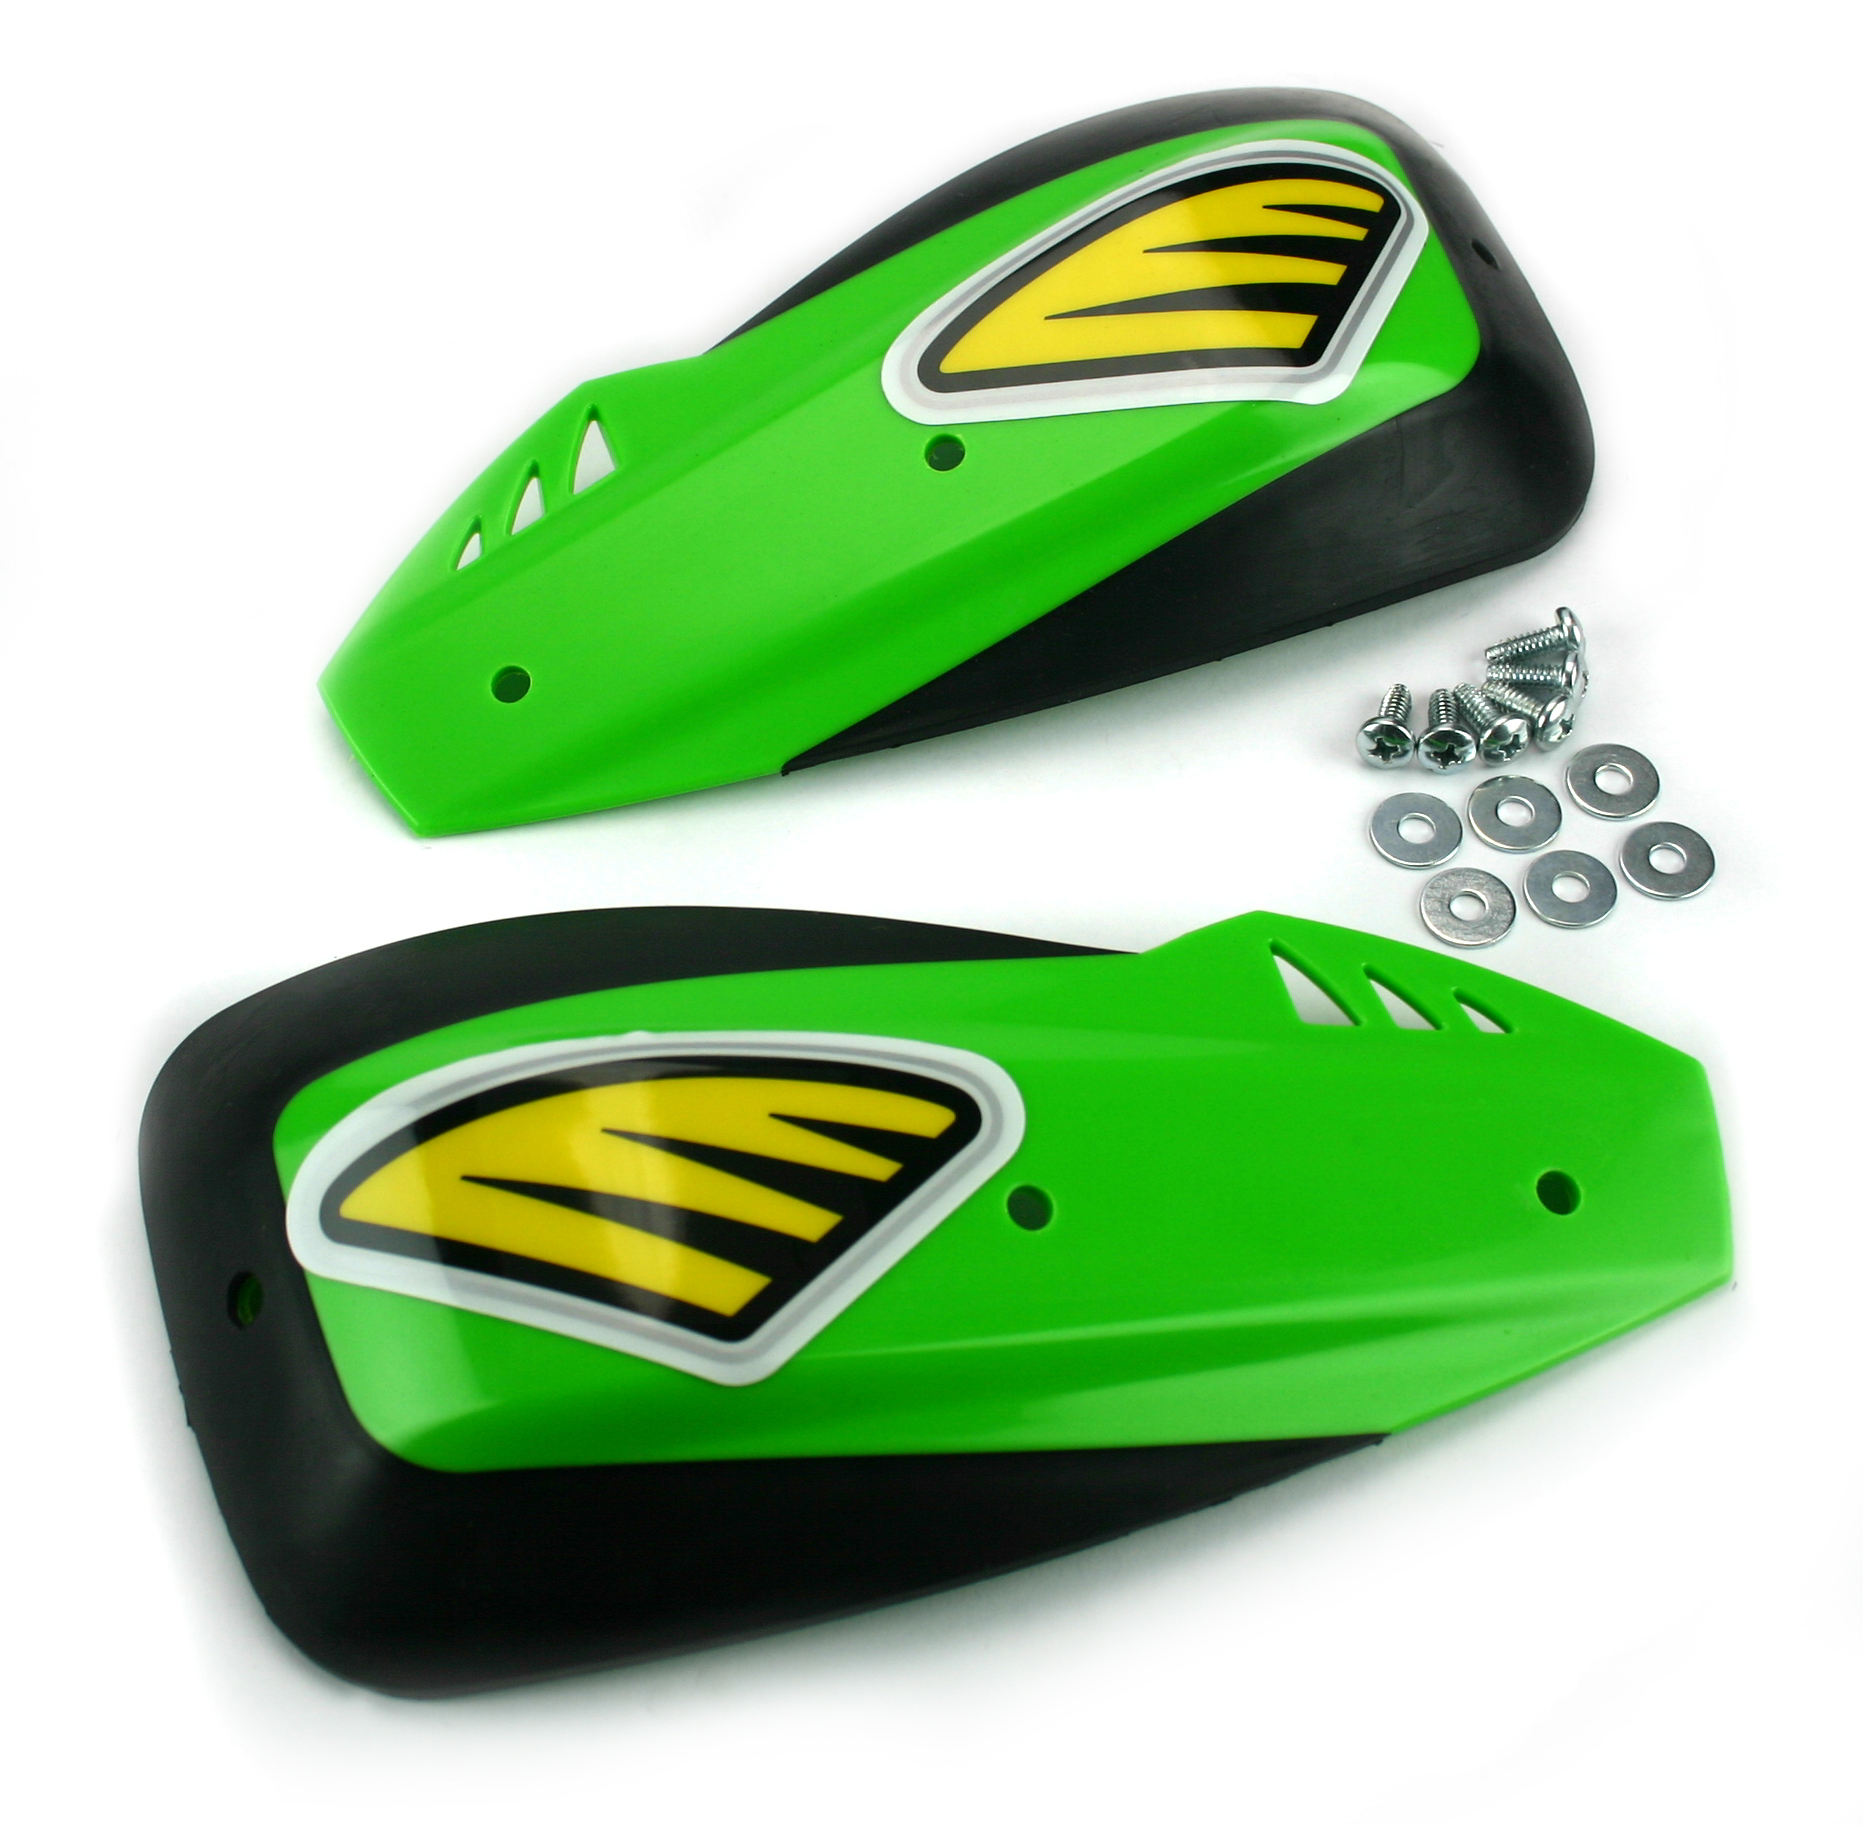 Enduro DX Handshields: Green: For use with alloy handguards